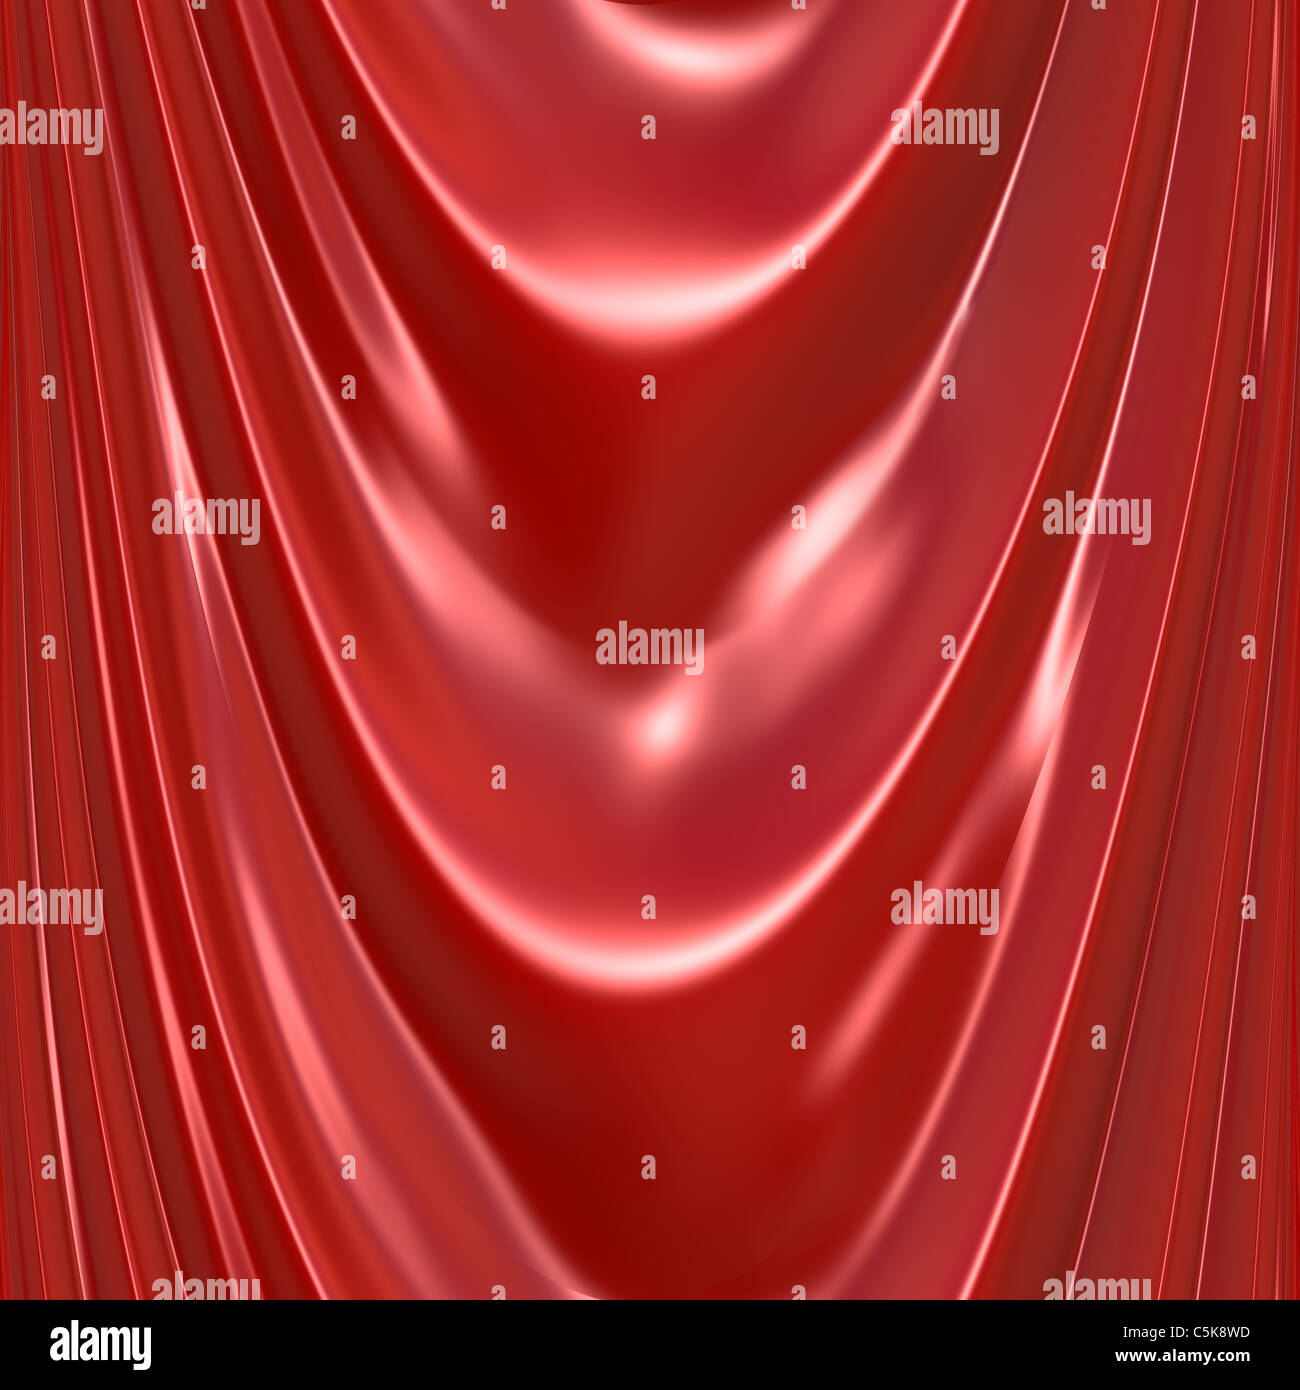 An illustration of a silky satin red drapery or curtain. This tiles seamlessly as a pattern in any direction. Stock Photo